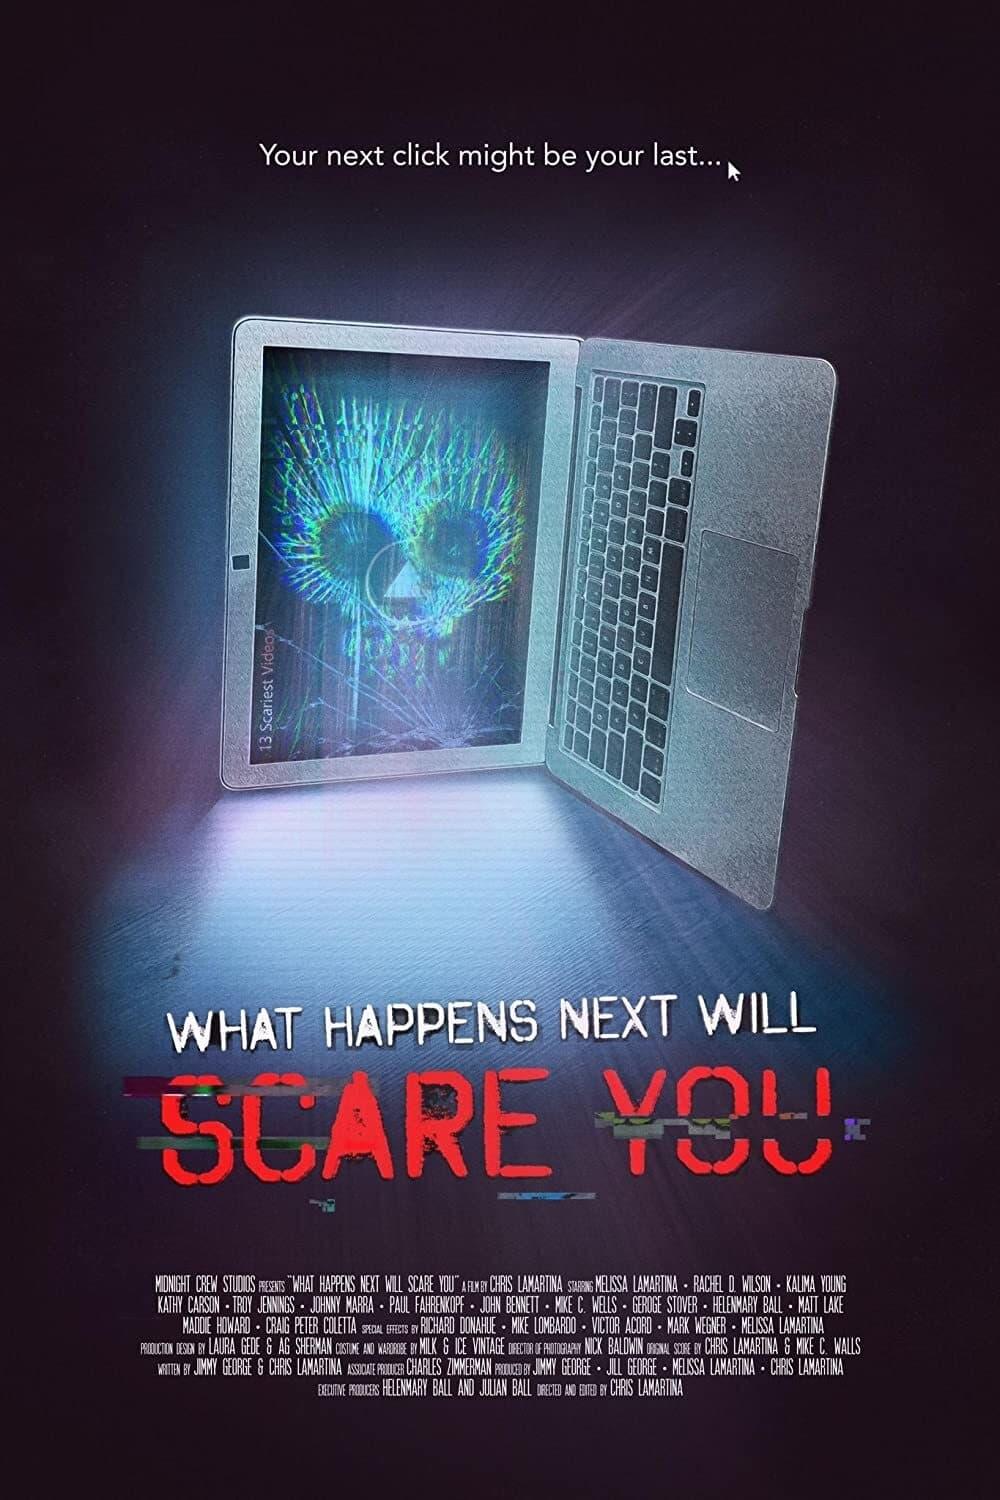 What Happens Next Will Scare You poster